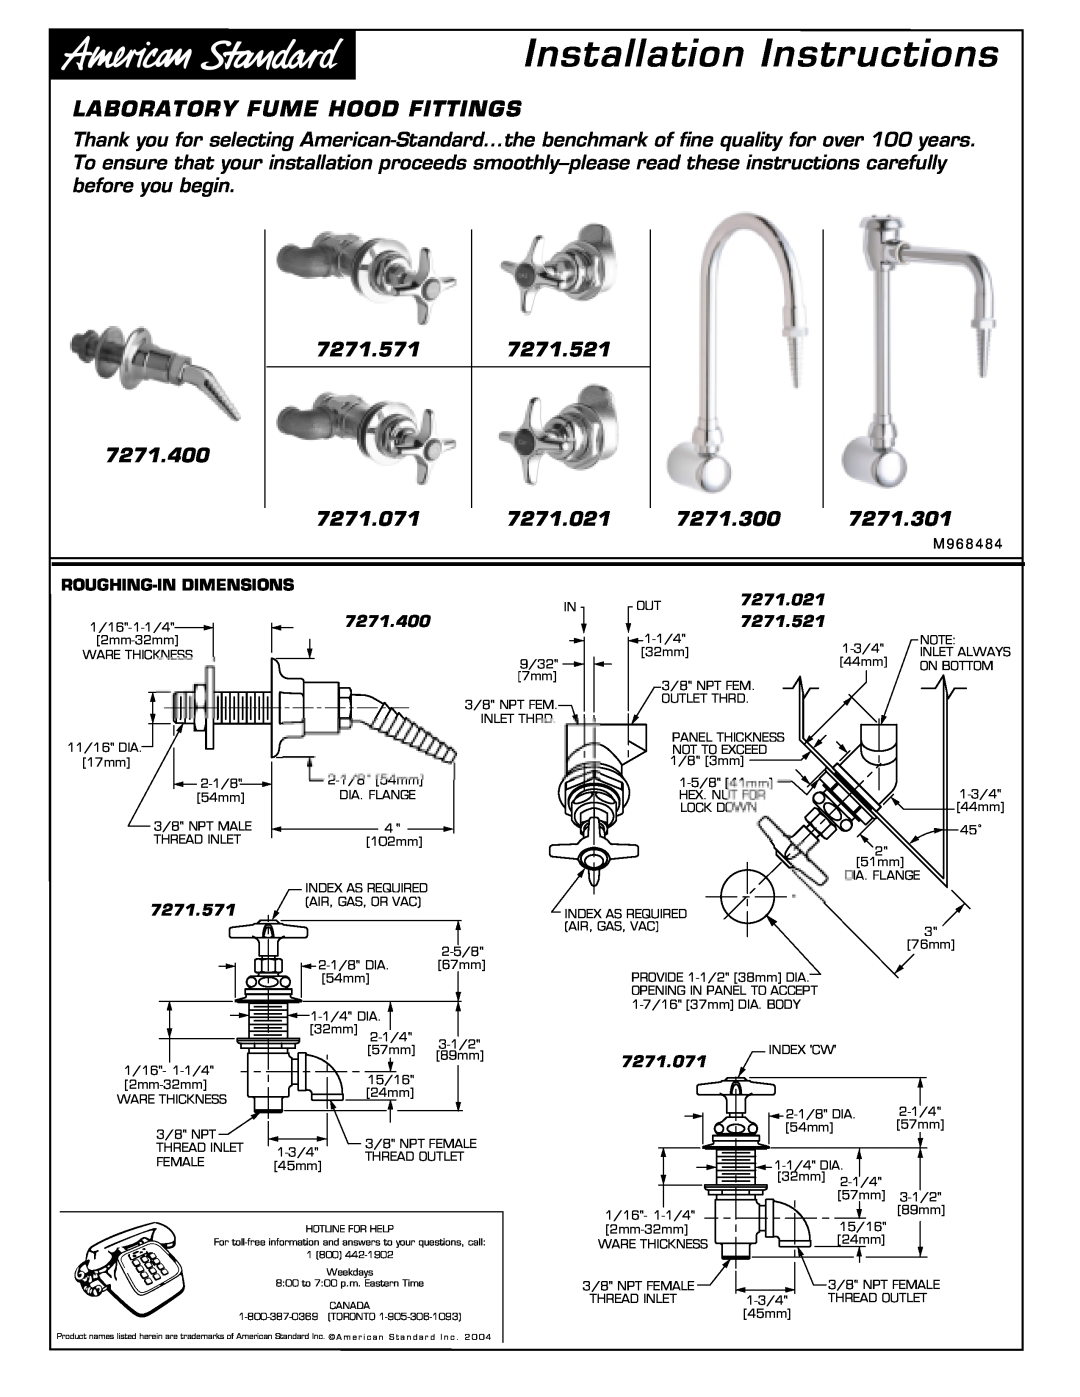 American Standard 7271.400 installation instructions Roughing-Indimensions, 7271.021, 7271.521, 7271.571, 7271.071 